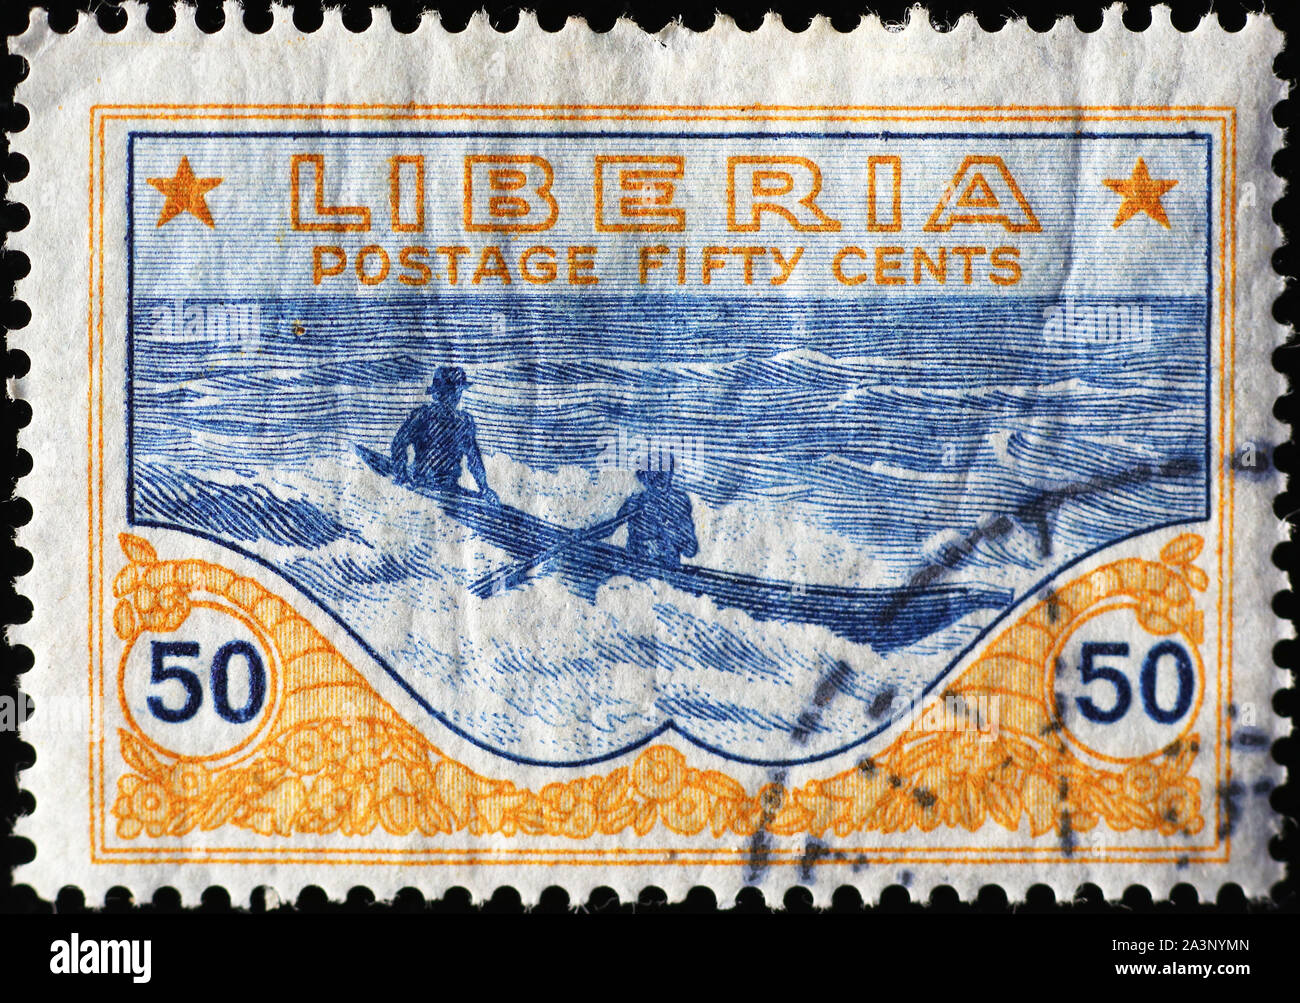 Two men in canoe on vintage stamp of Liberia Stock Photo